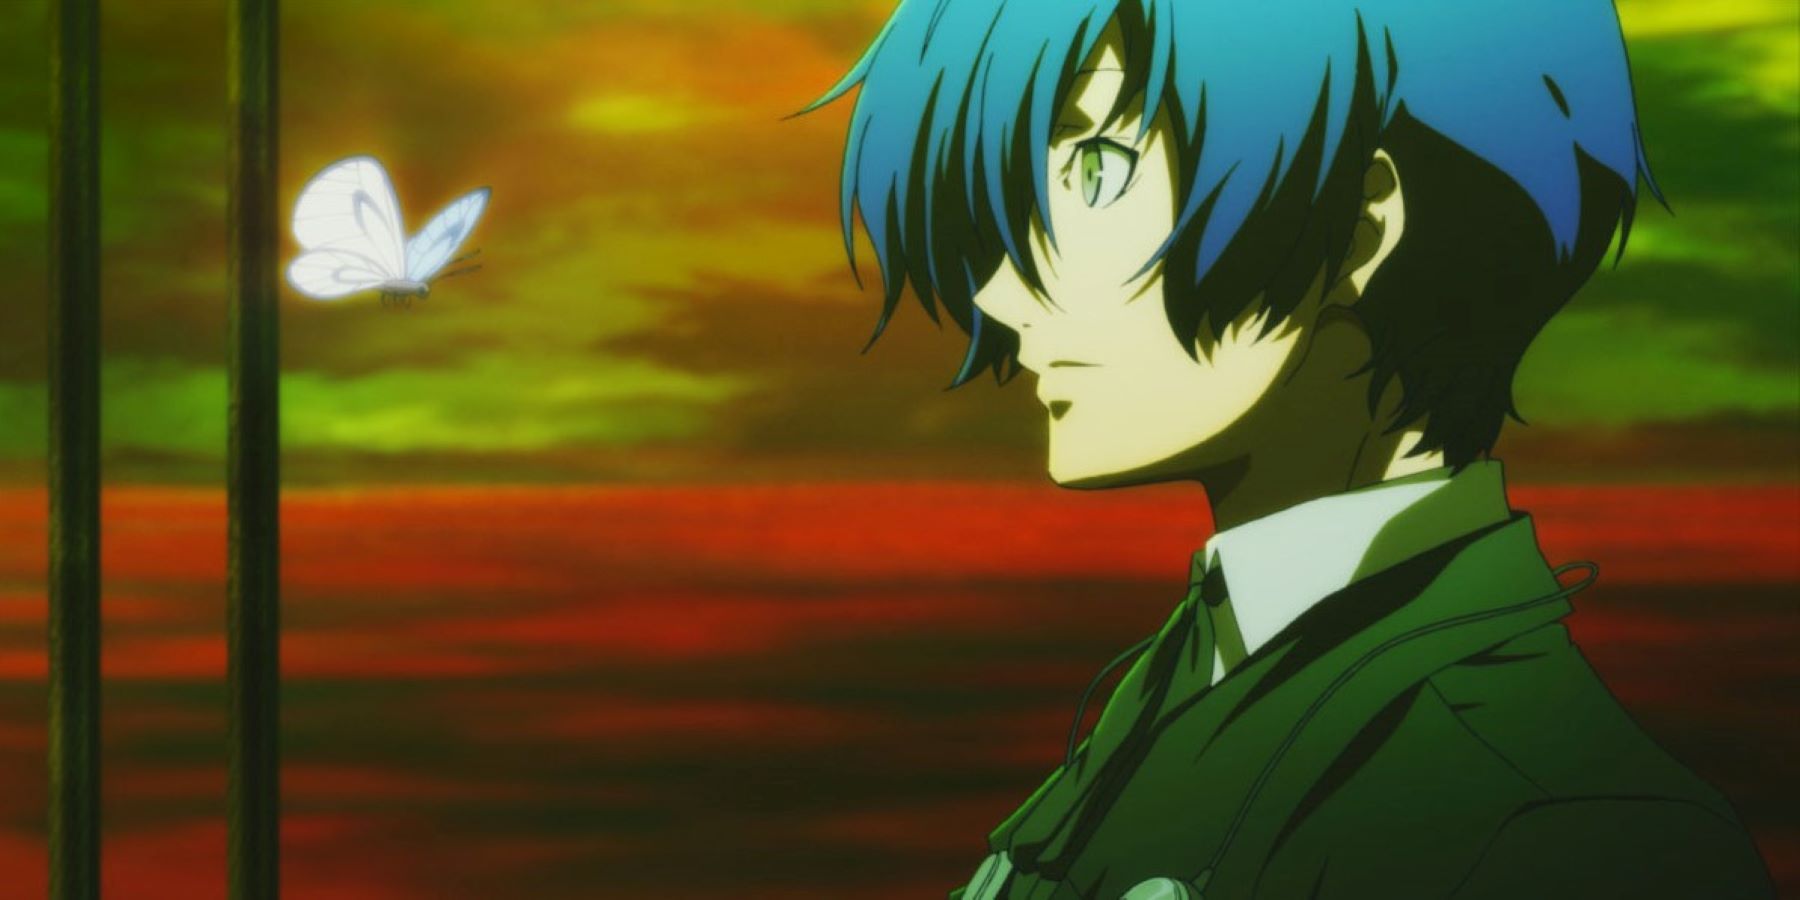 Screenshot of the Persona 3 male protagonist interacting with a butterfly